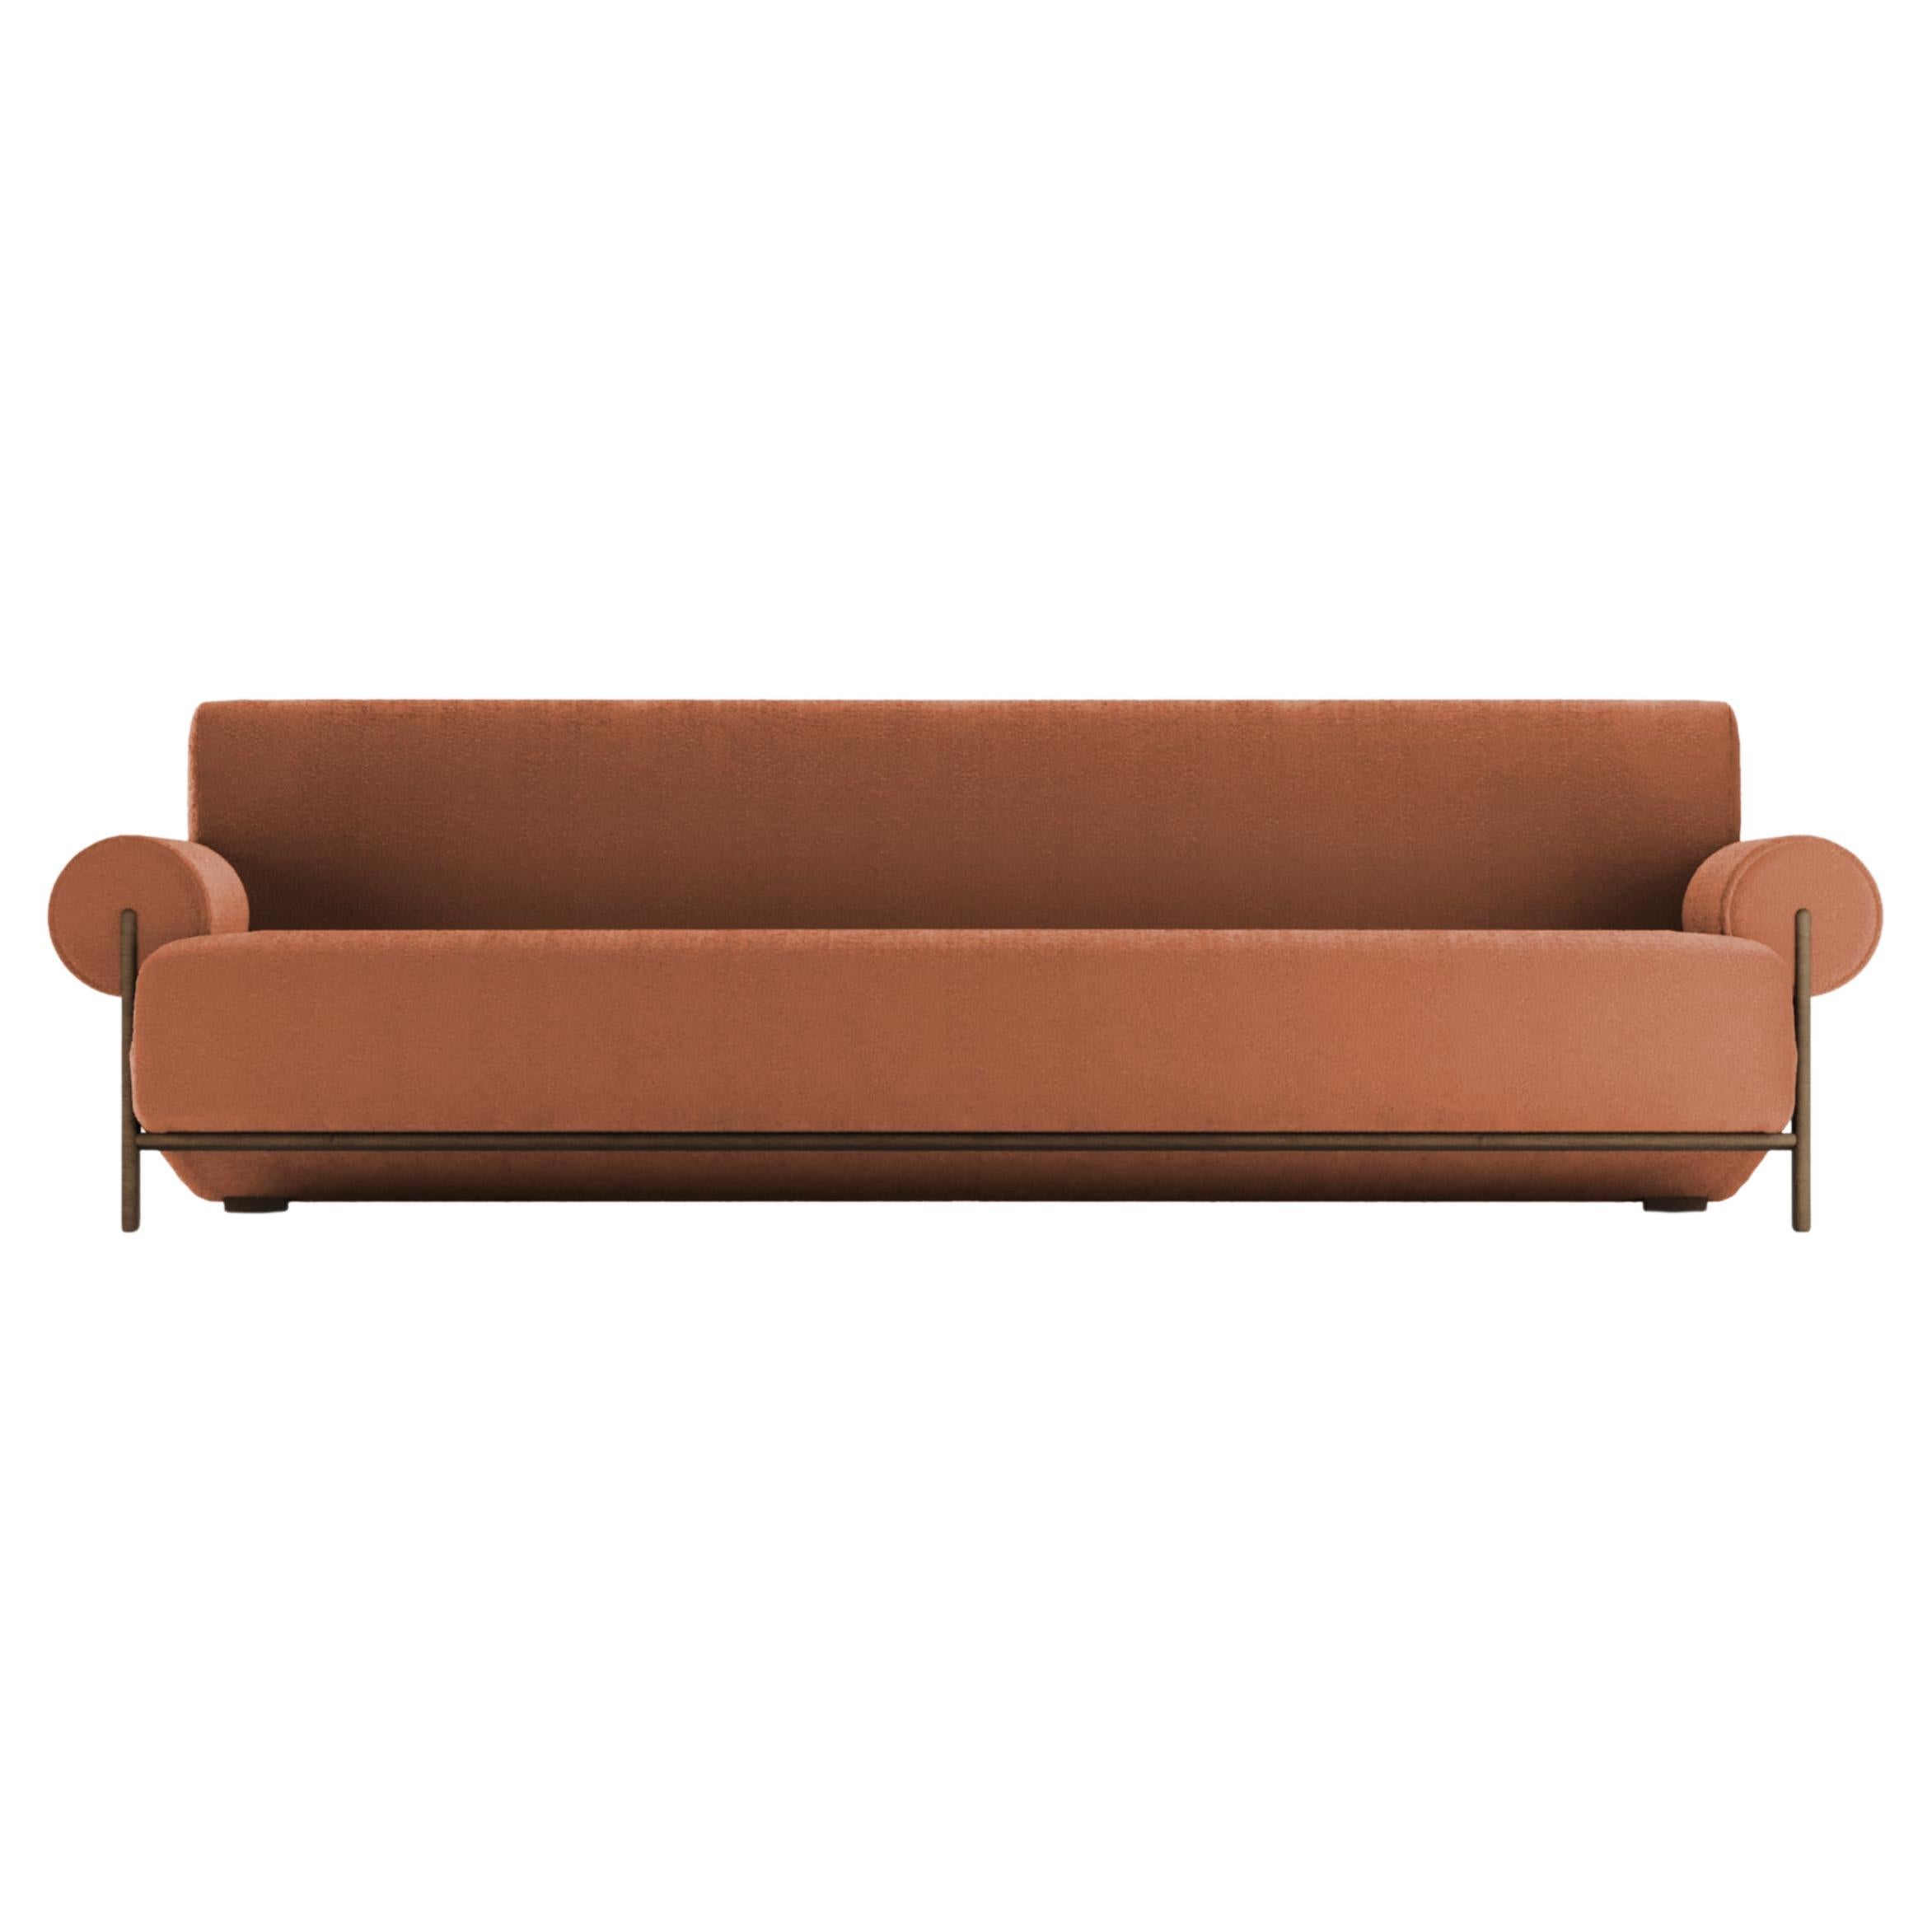 Contemporary Modern Paloma Sofa in Bouclé Burnt Orange by Collector